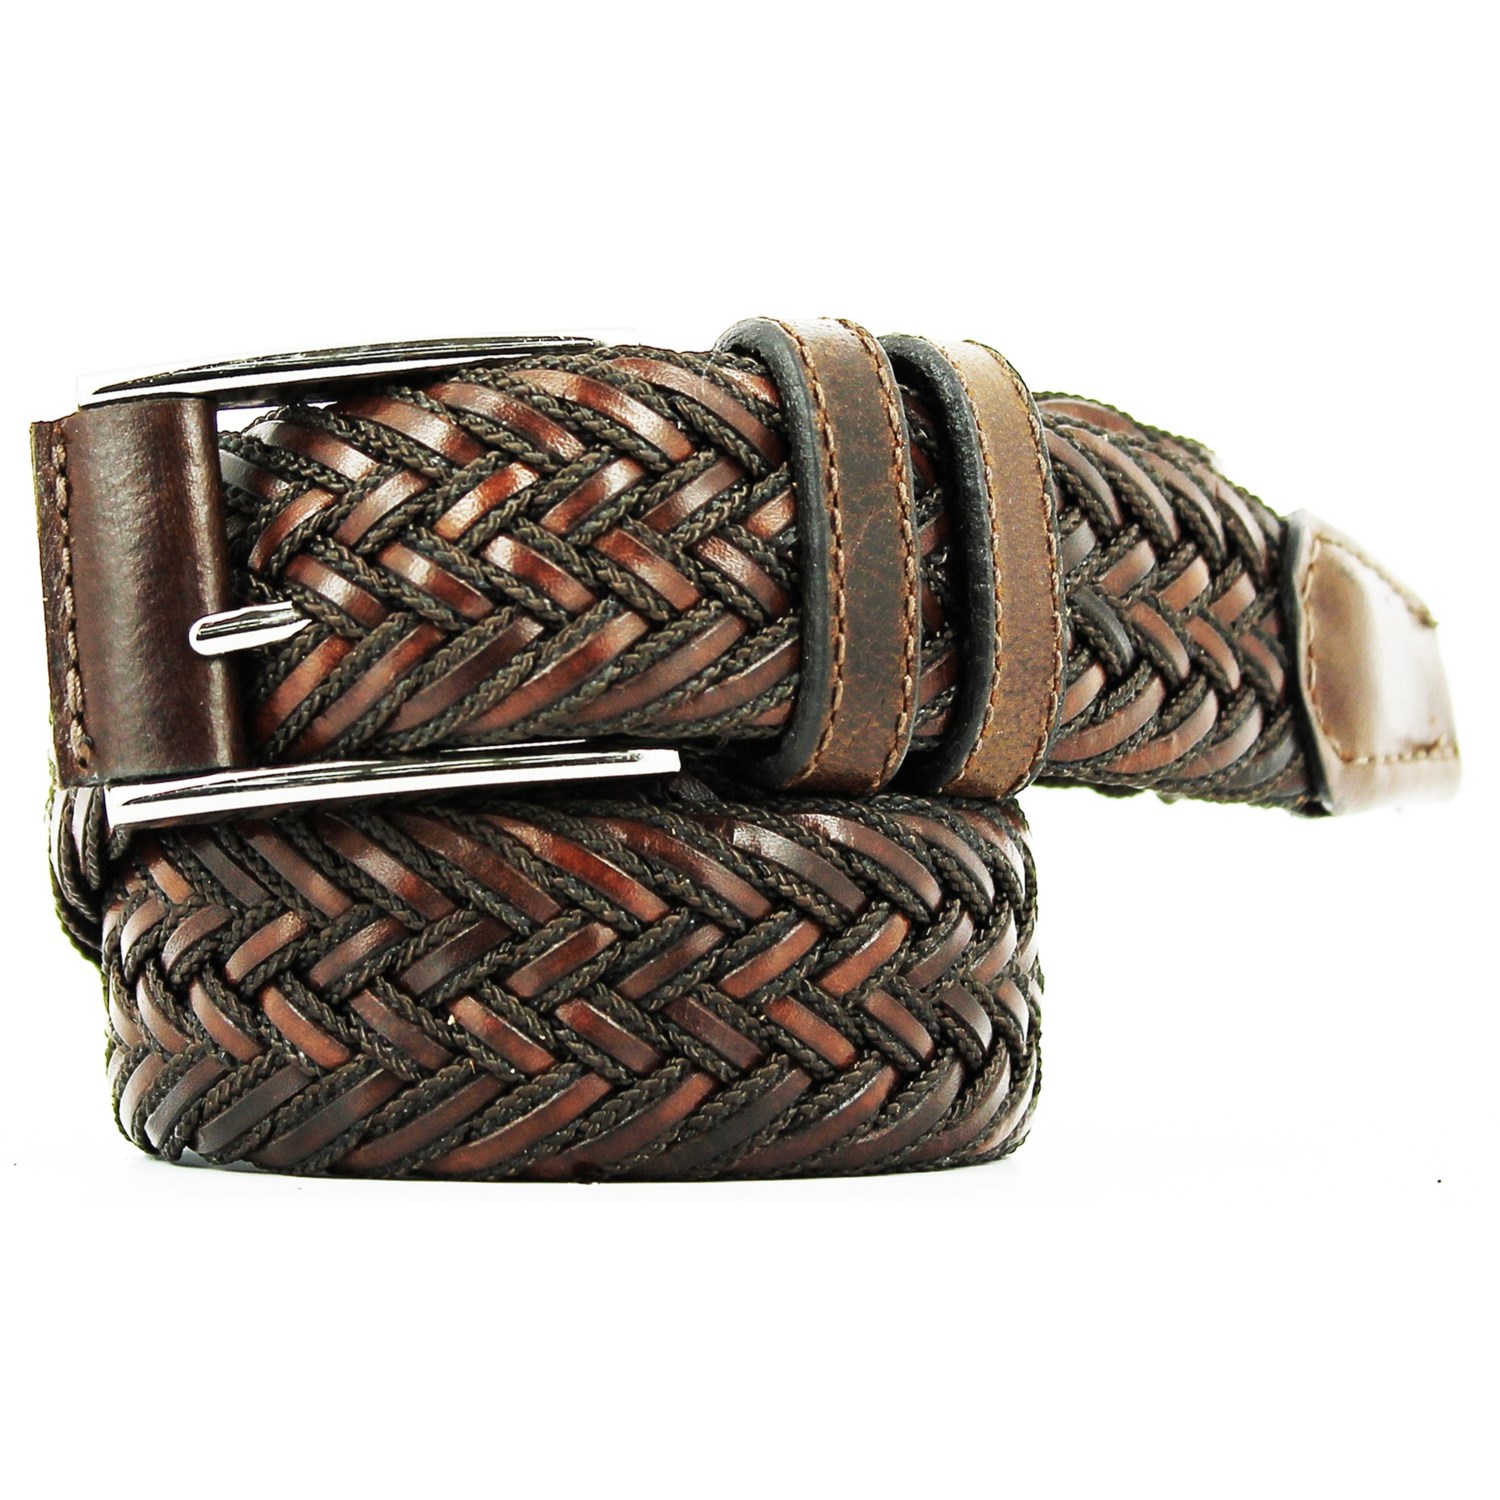 Remo Tulliani Braided Belt - Leather-Cotton (For Men) - Save 41%